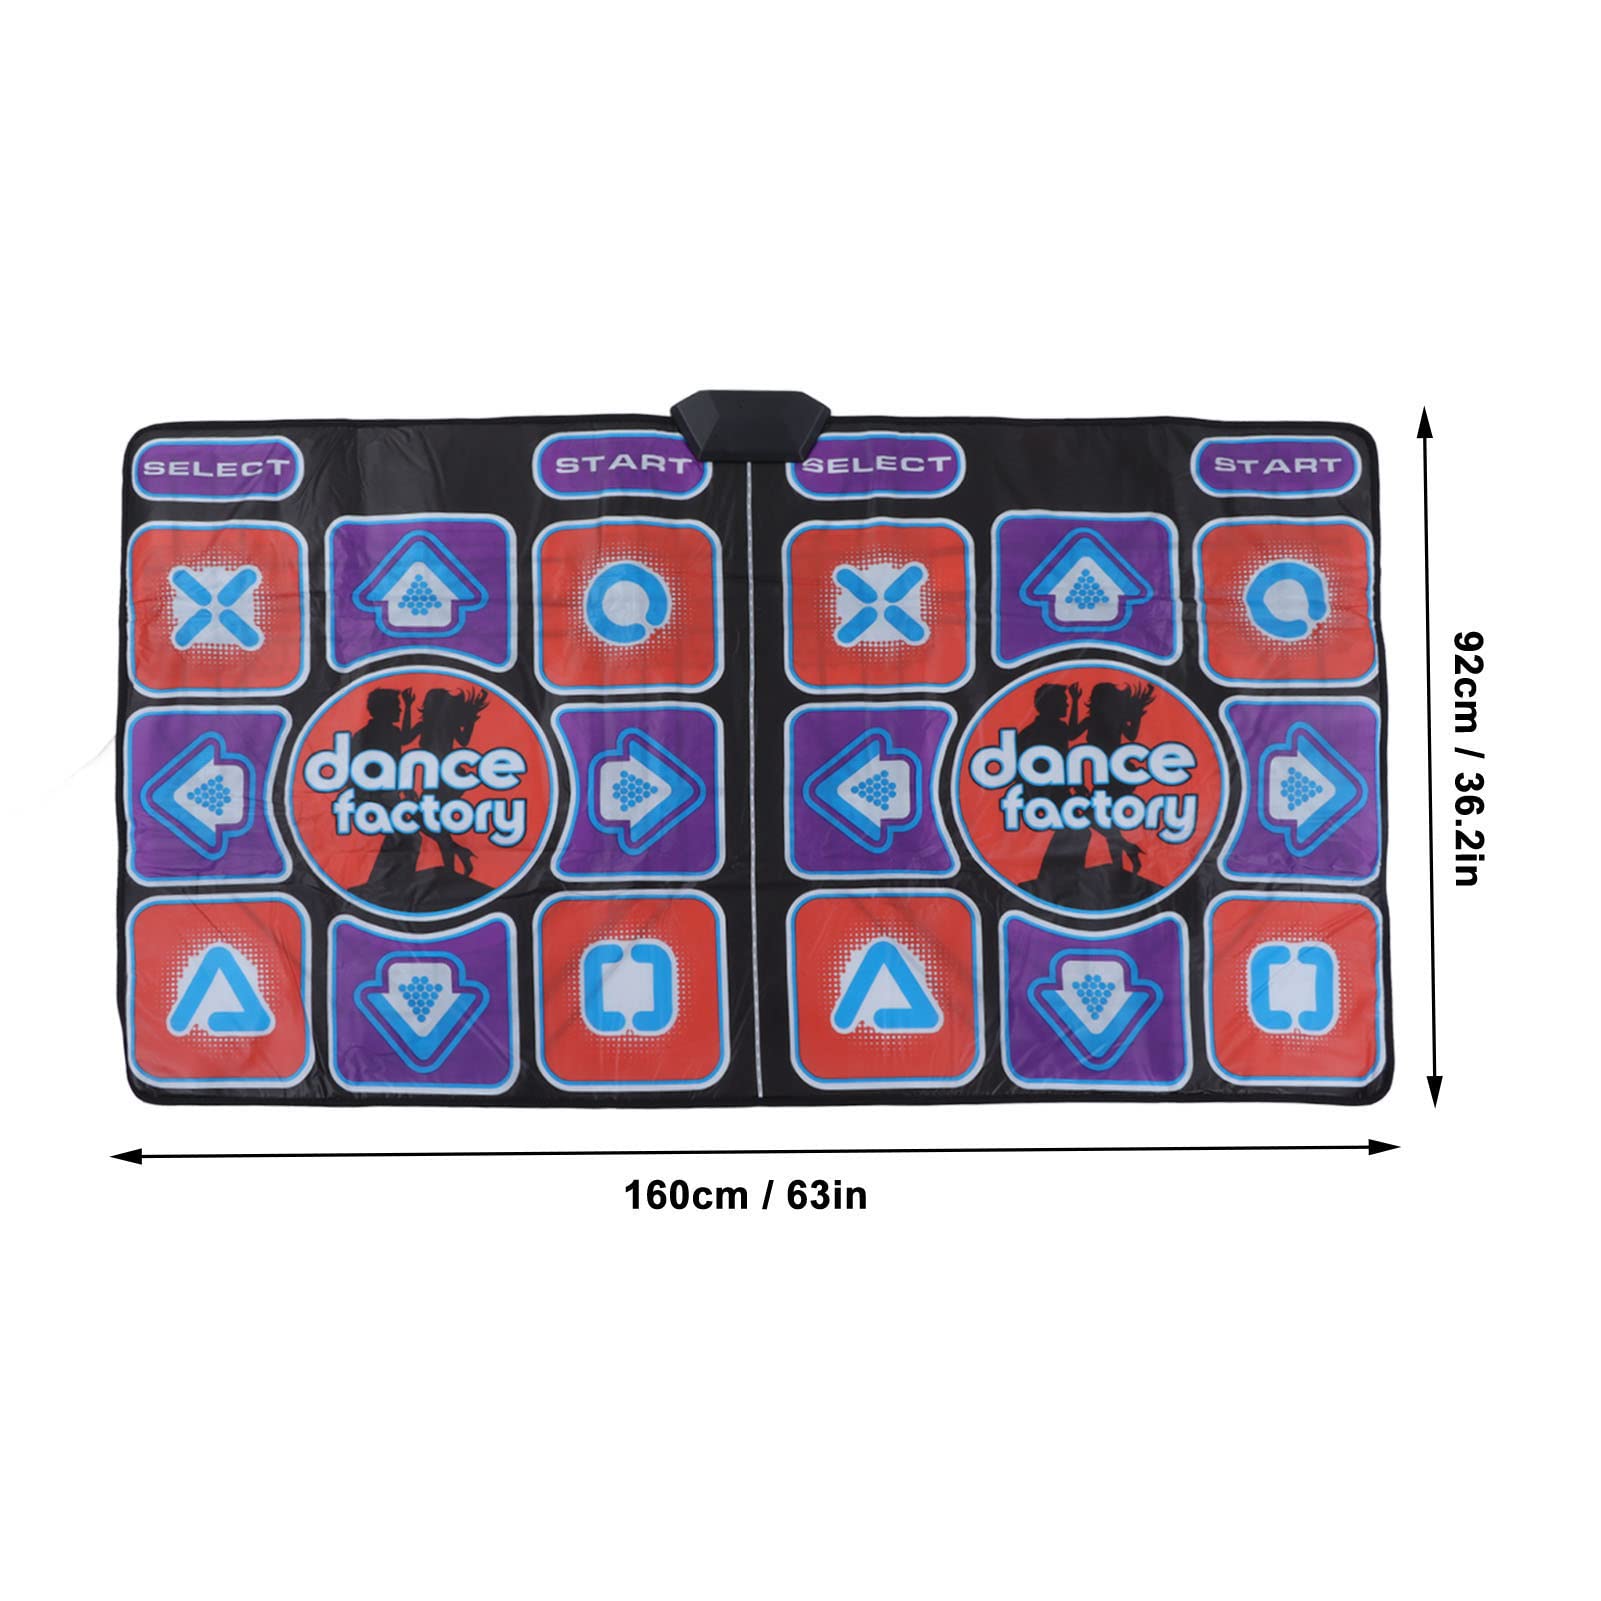 Luqeeg Musical Electronic Dance Mats, Double Player Dance Pad,Foldable Exercise Dance Mat with 2 Remote Controls with AV Cable Exercise Fitness Dance Step Pad Games for TV for Indoor